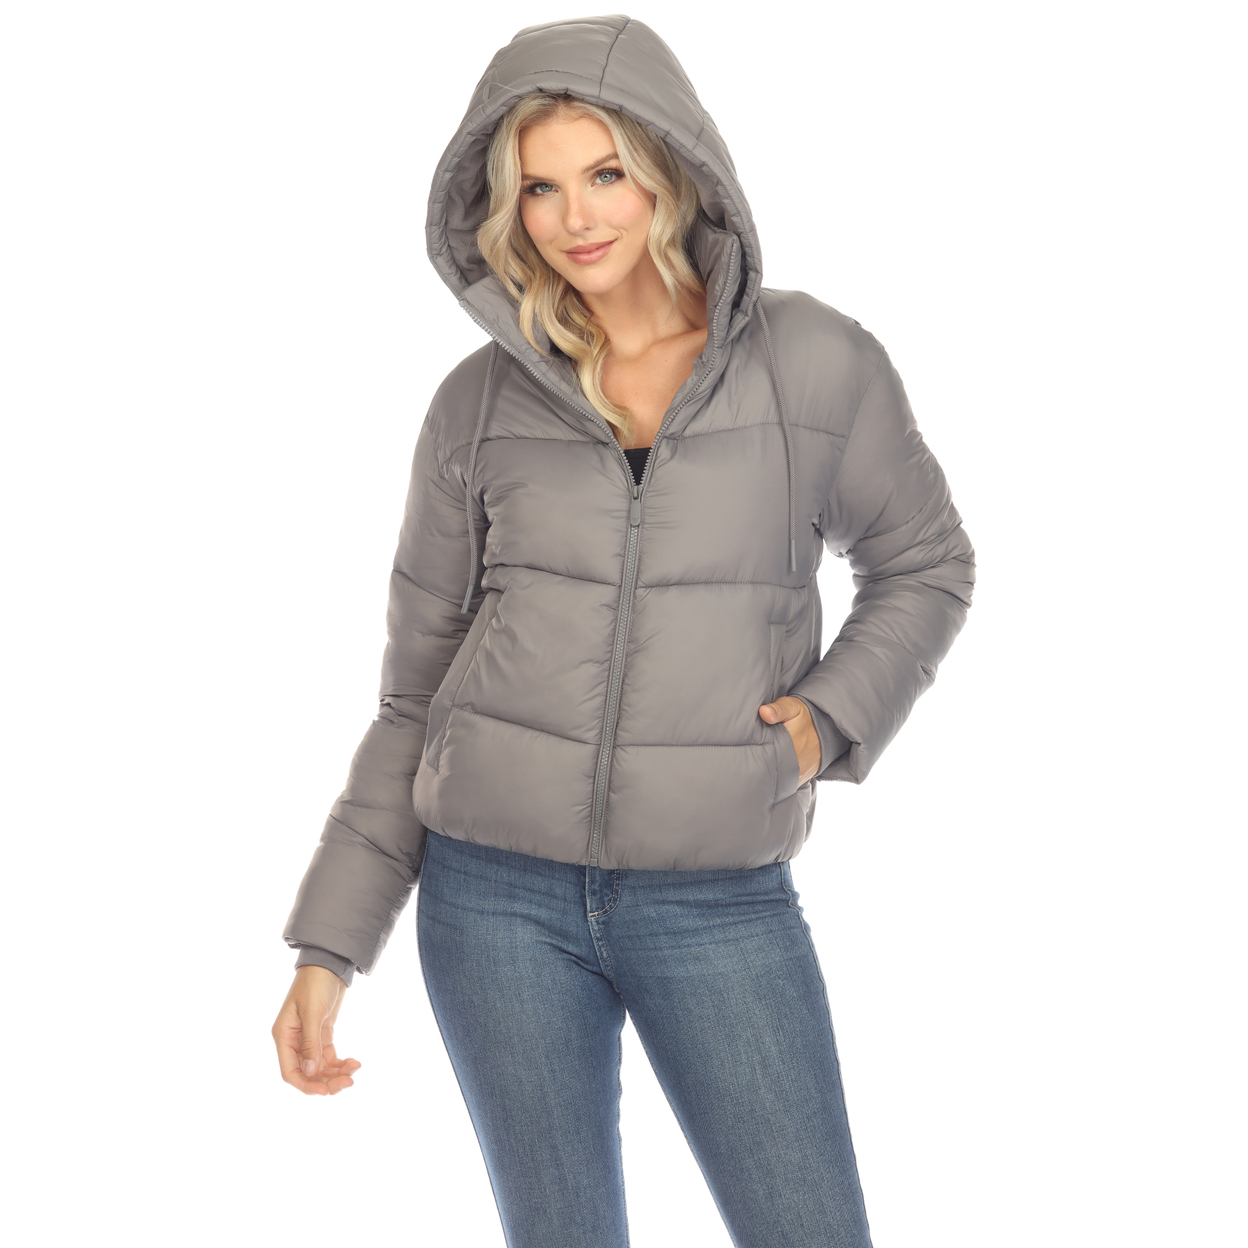 White Mark Women's Zip Hooded Puffer Jacket With Pockets - Gray, Large